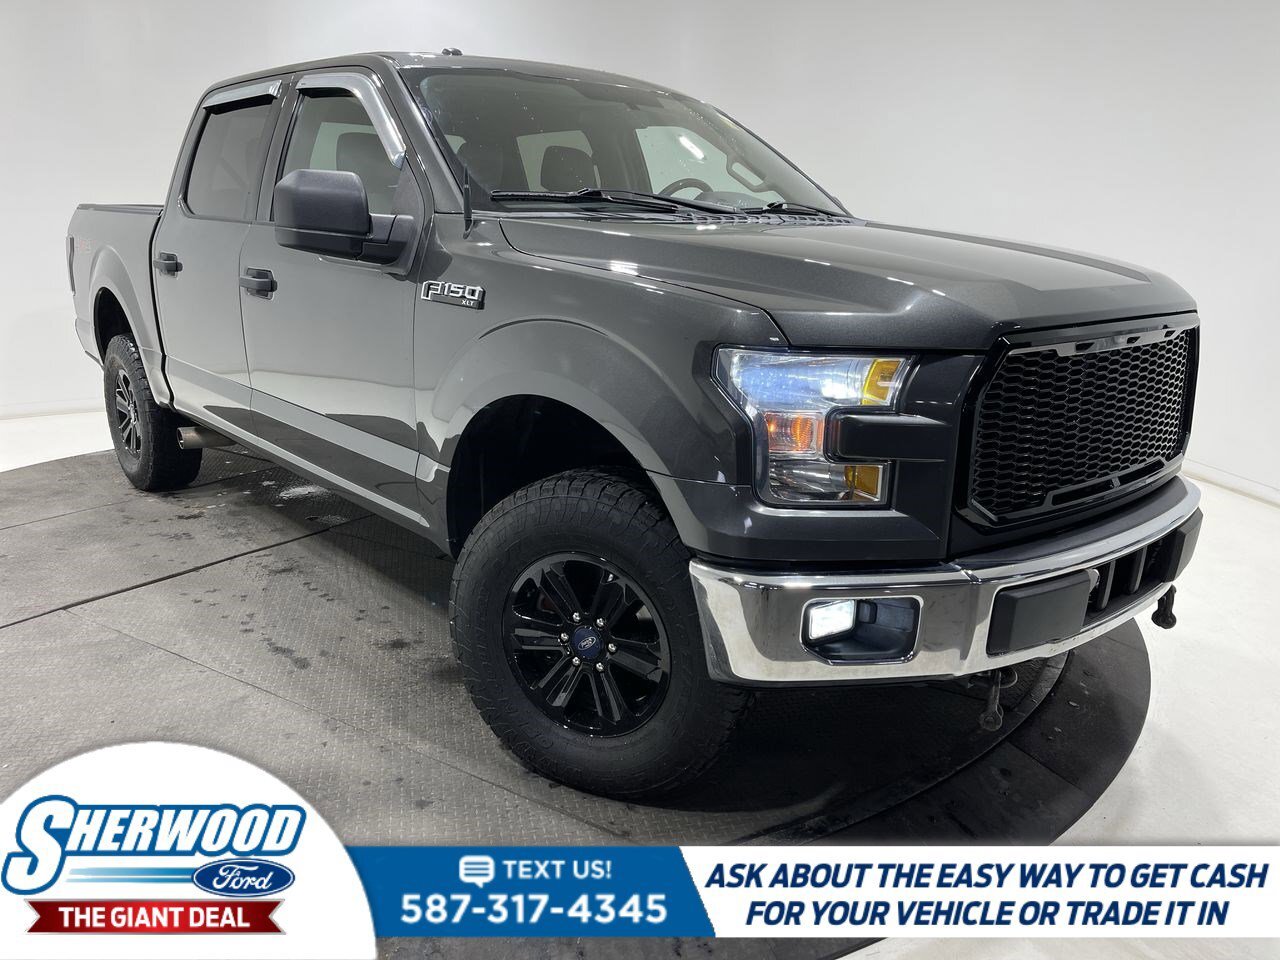 2015 Ford F-150 XLT- $0 Down $167 Weekly